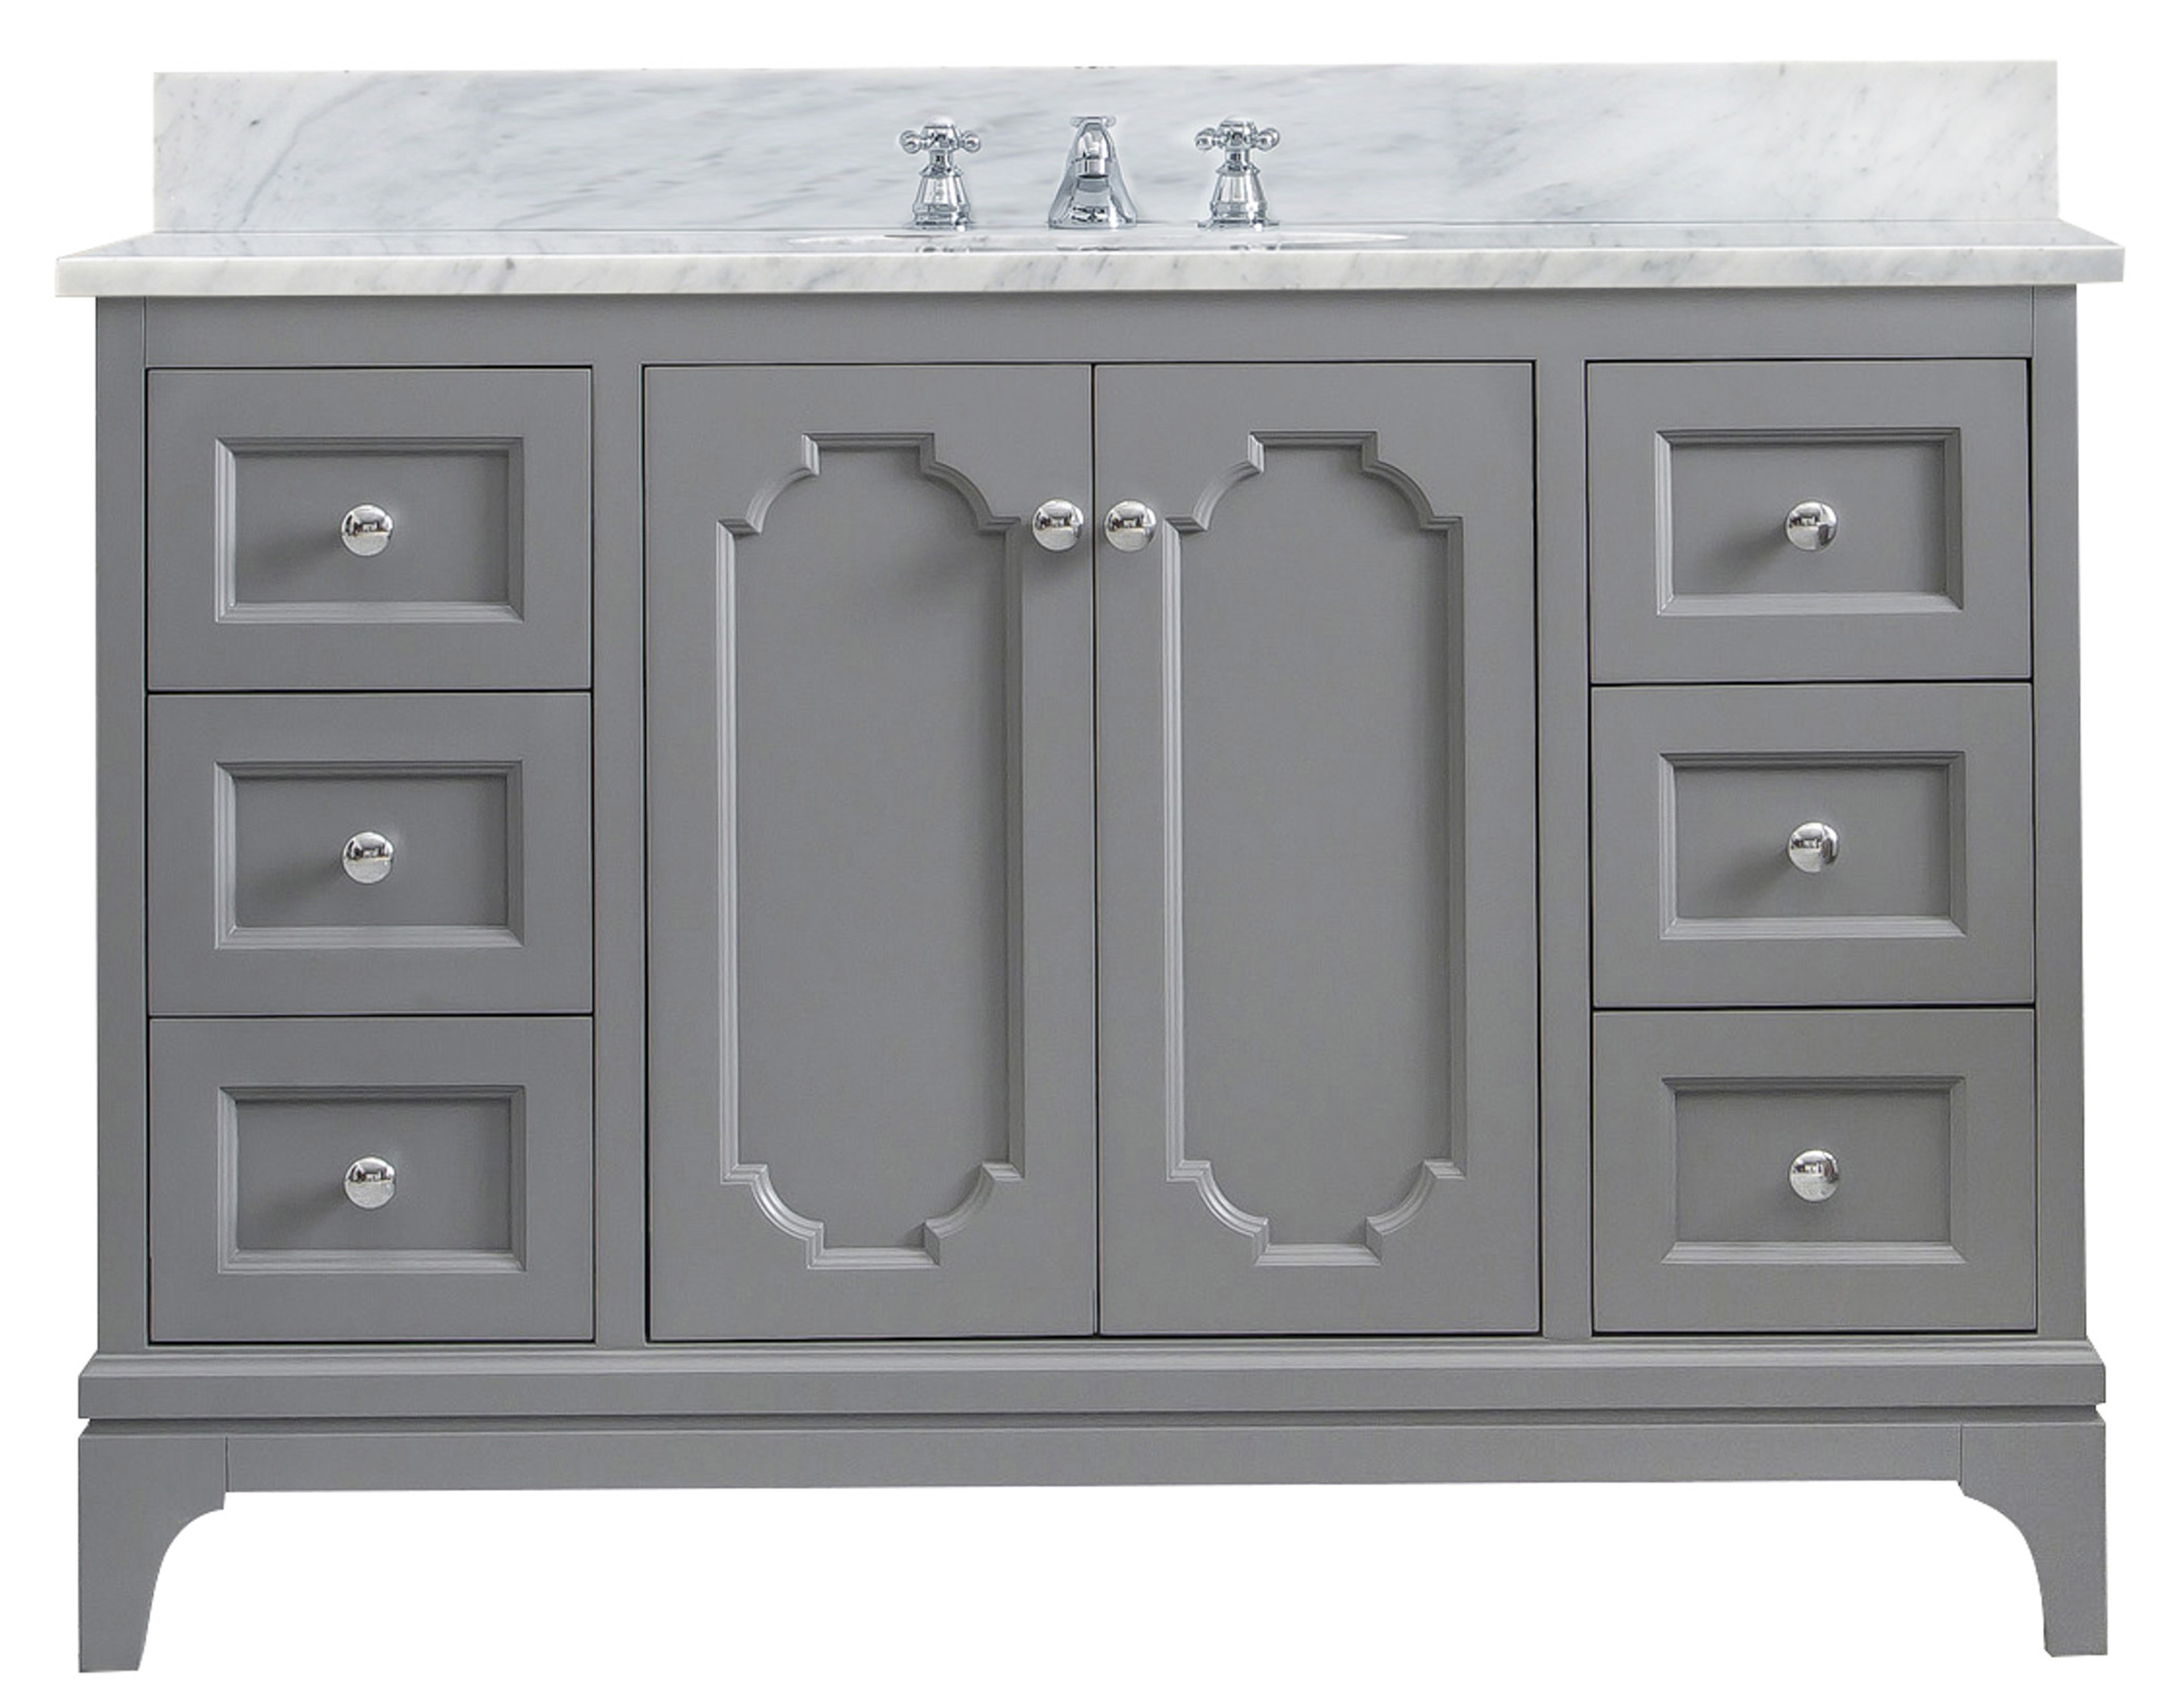 48" Single Sink Carrara White Marble Countertop Vanity in Cashmere Grey with Mirror and Faucet Options